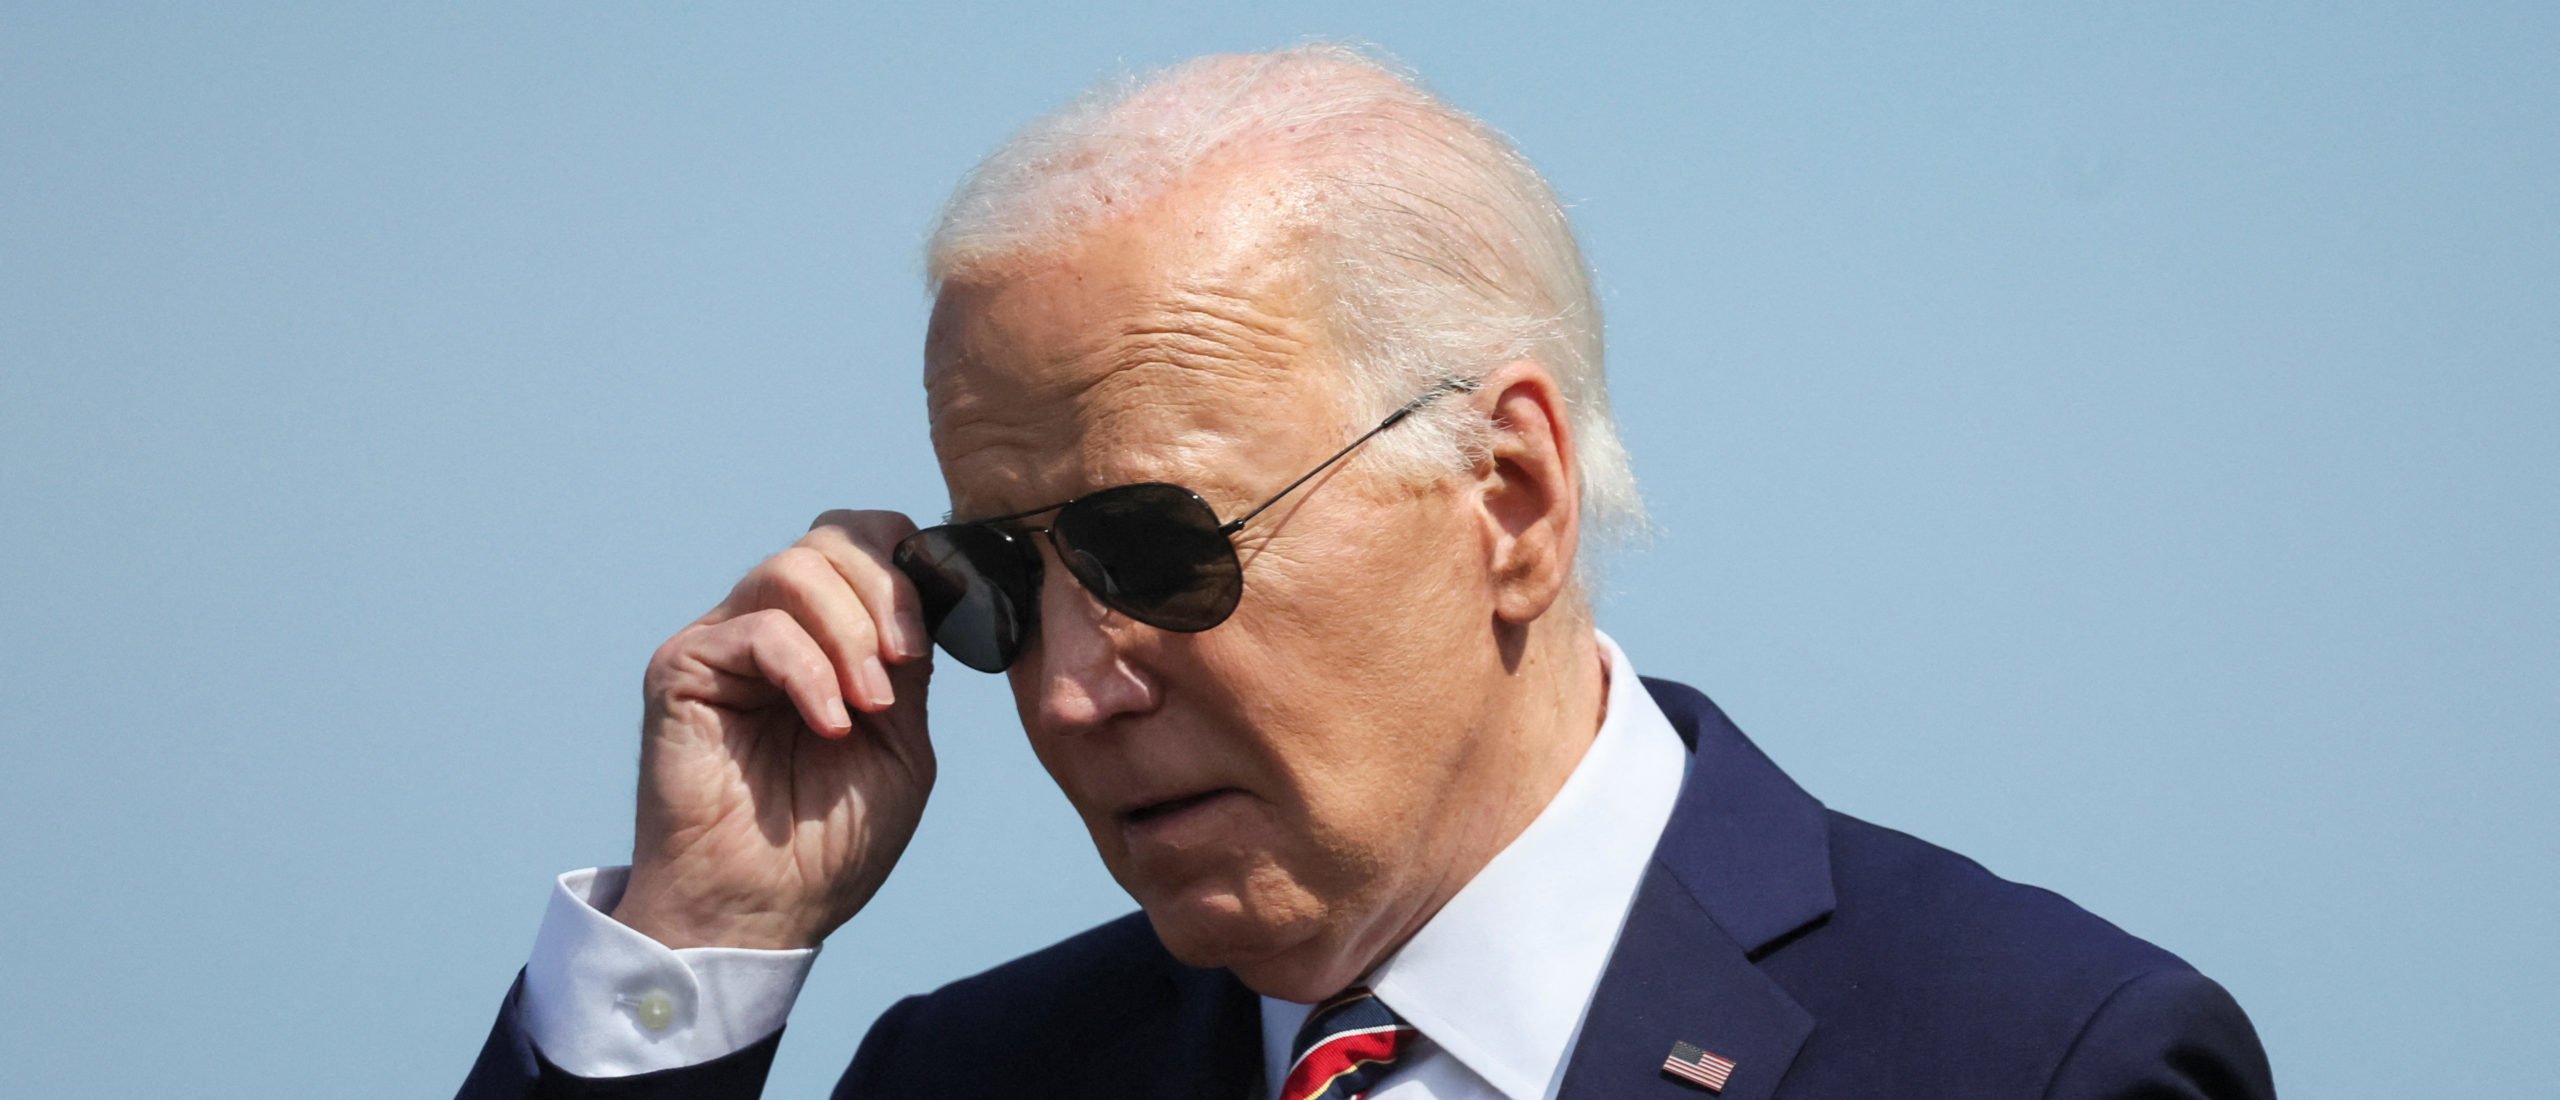 Biden’s Next Big Nightmare Could Be Brewing In Aftermath Of Federal Sex Scandal